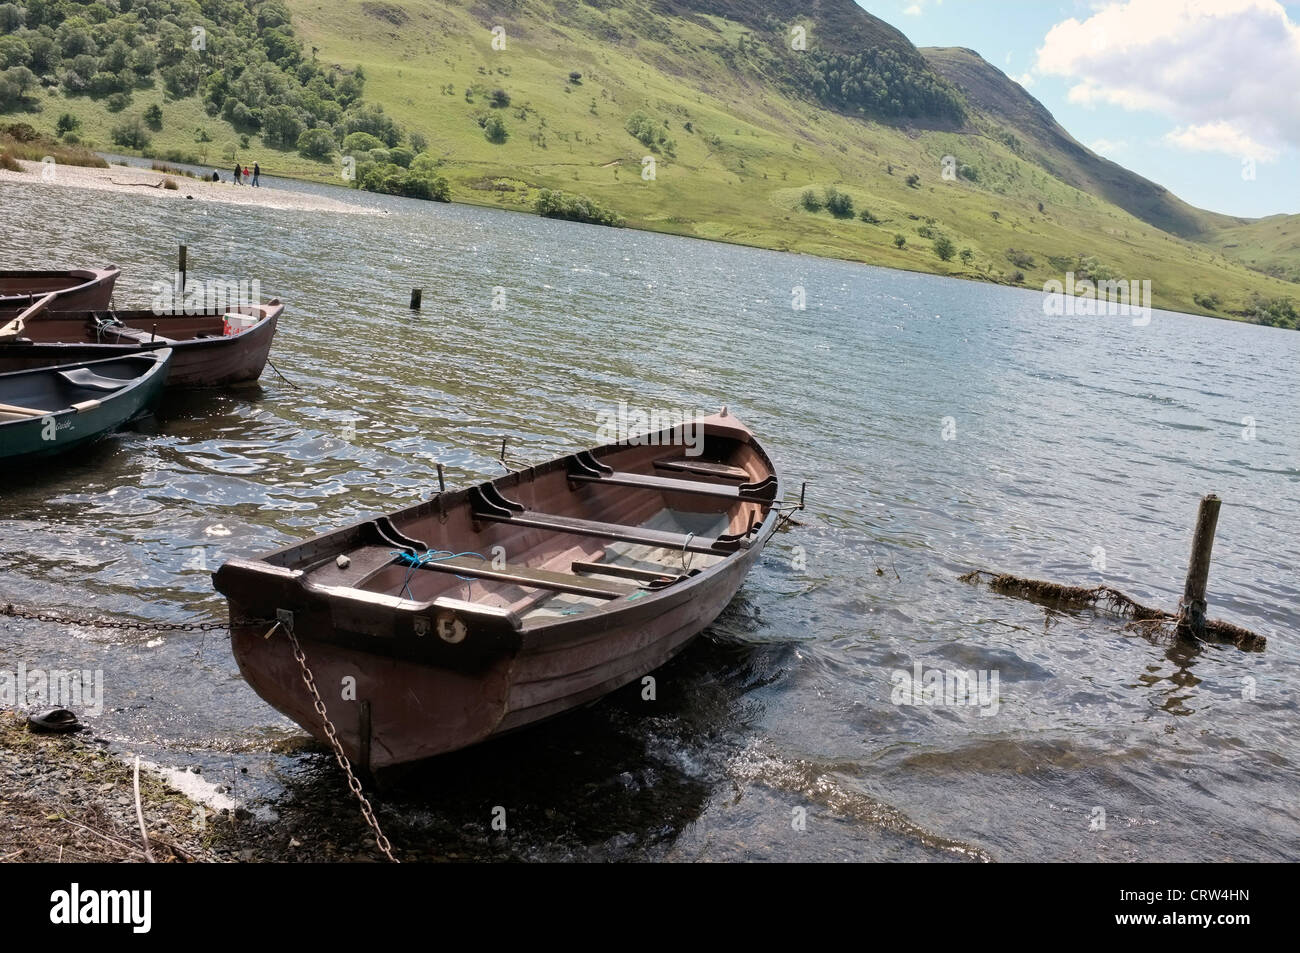 Crummock Water in Cumbria photographed from the Southern end Stock Photo